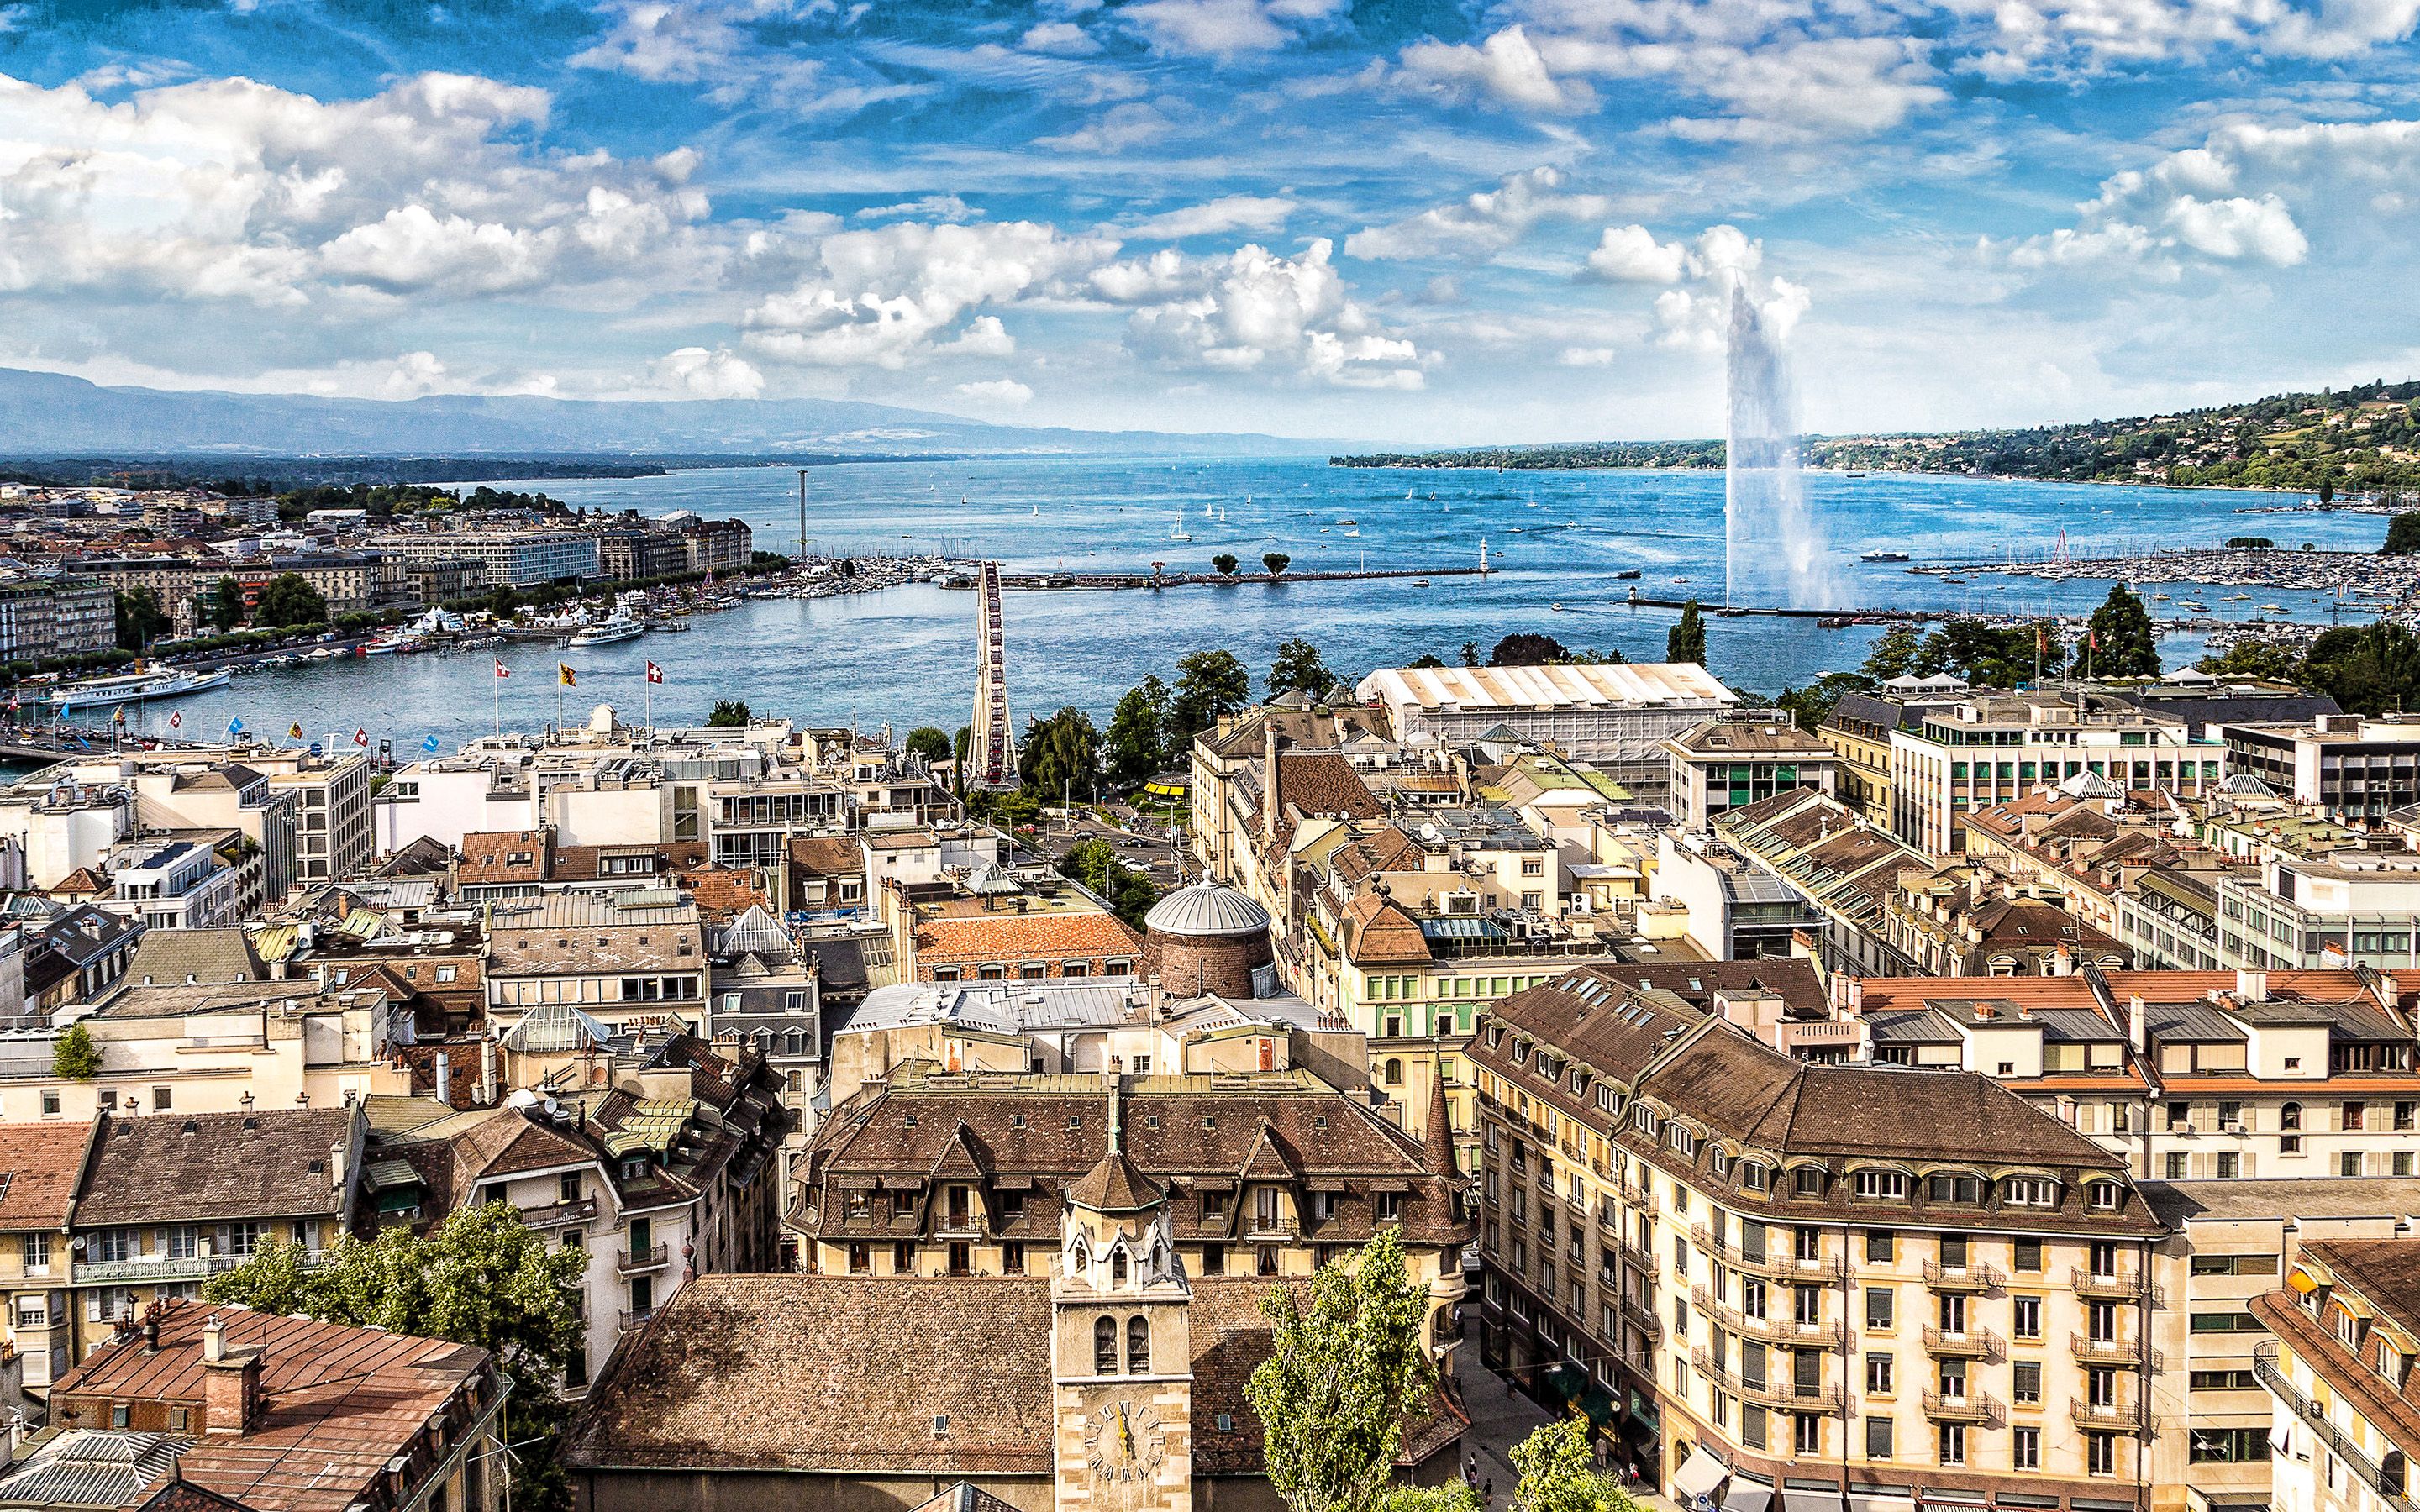 Download wallpaper Geneva, swiss city, Lake Leman, old houses, Geneva cityscape, old buildings, Switzerland for desktop with resolution 2880x1800. High Quality HD picture wallpaper